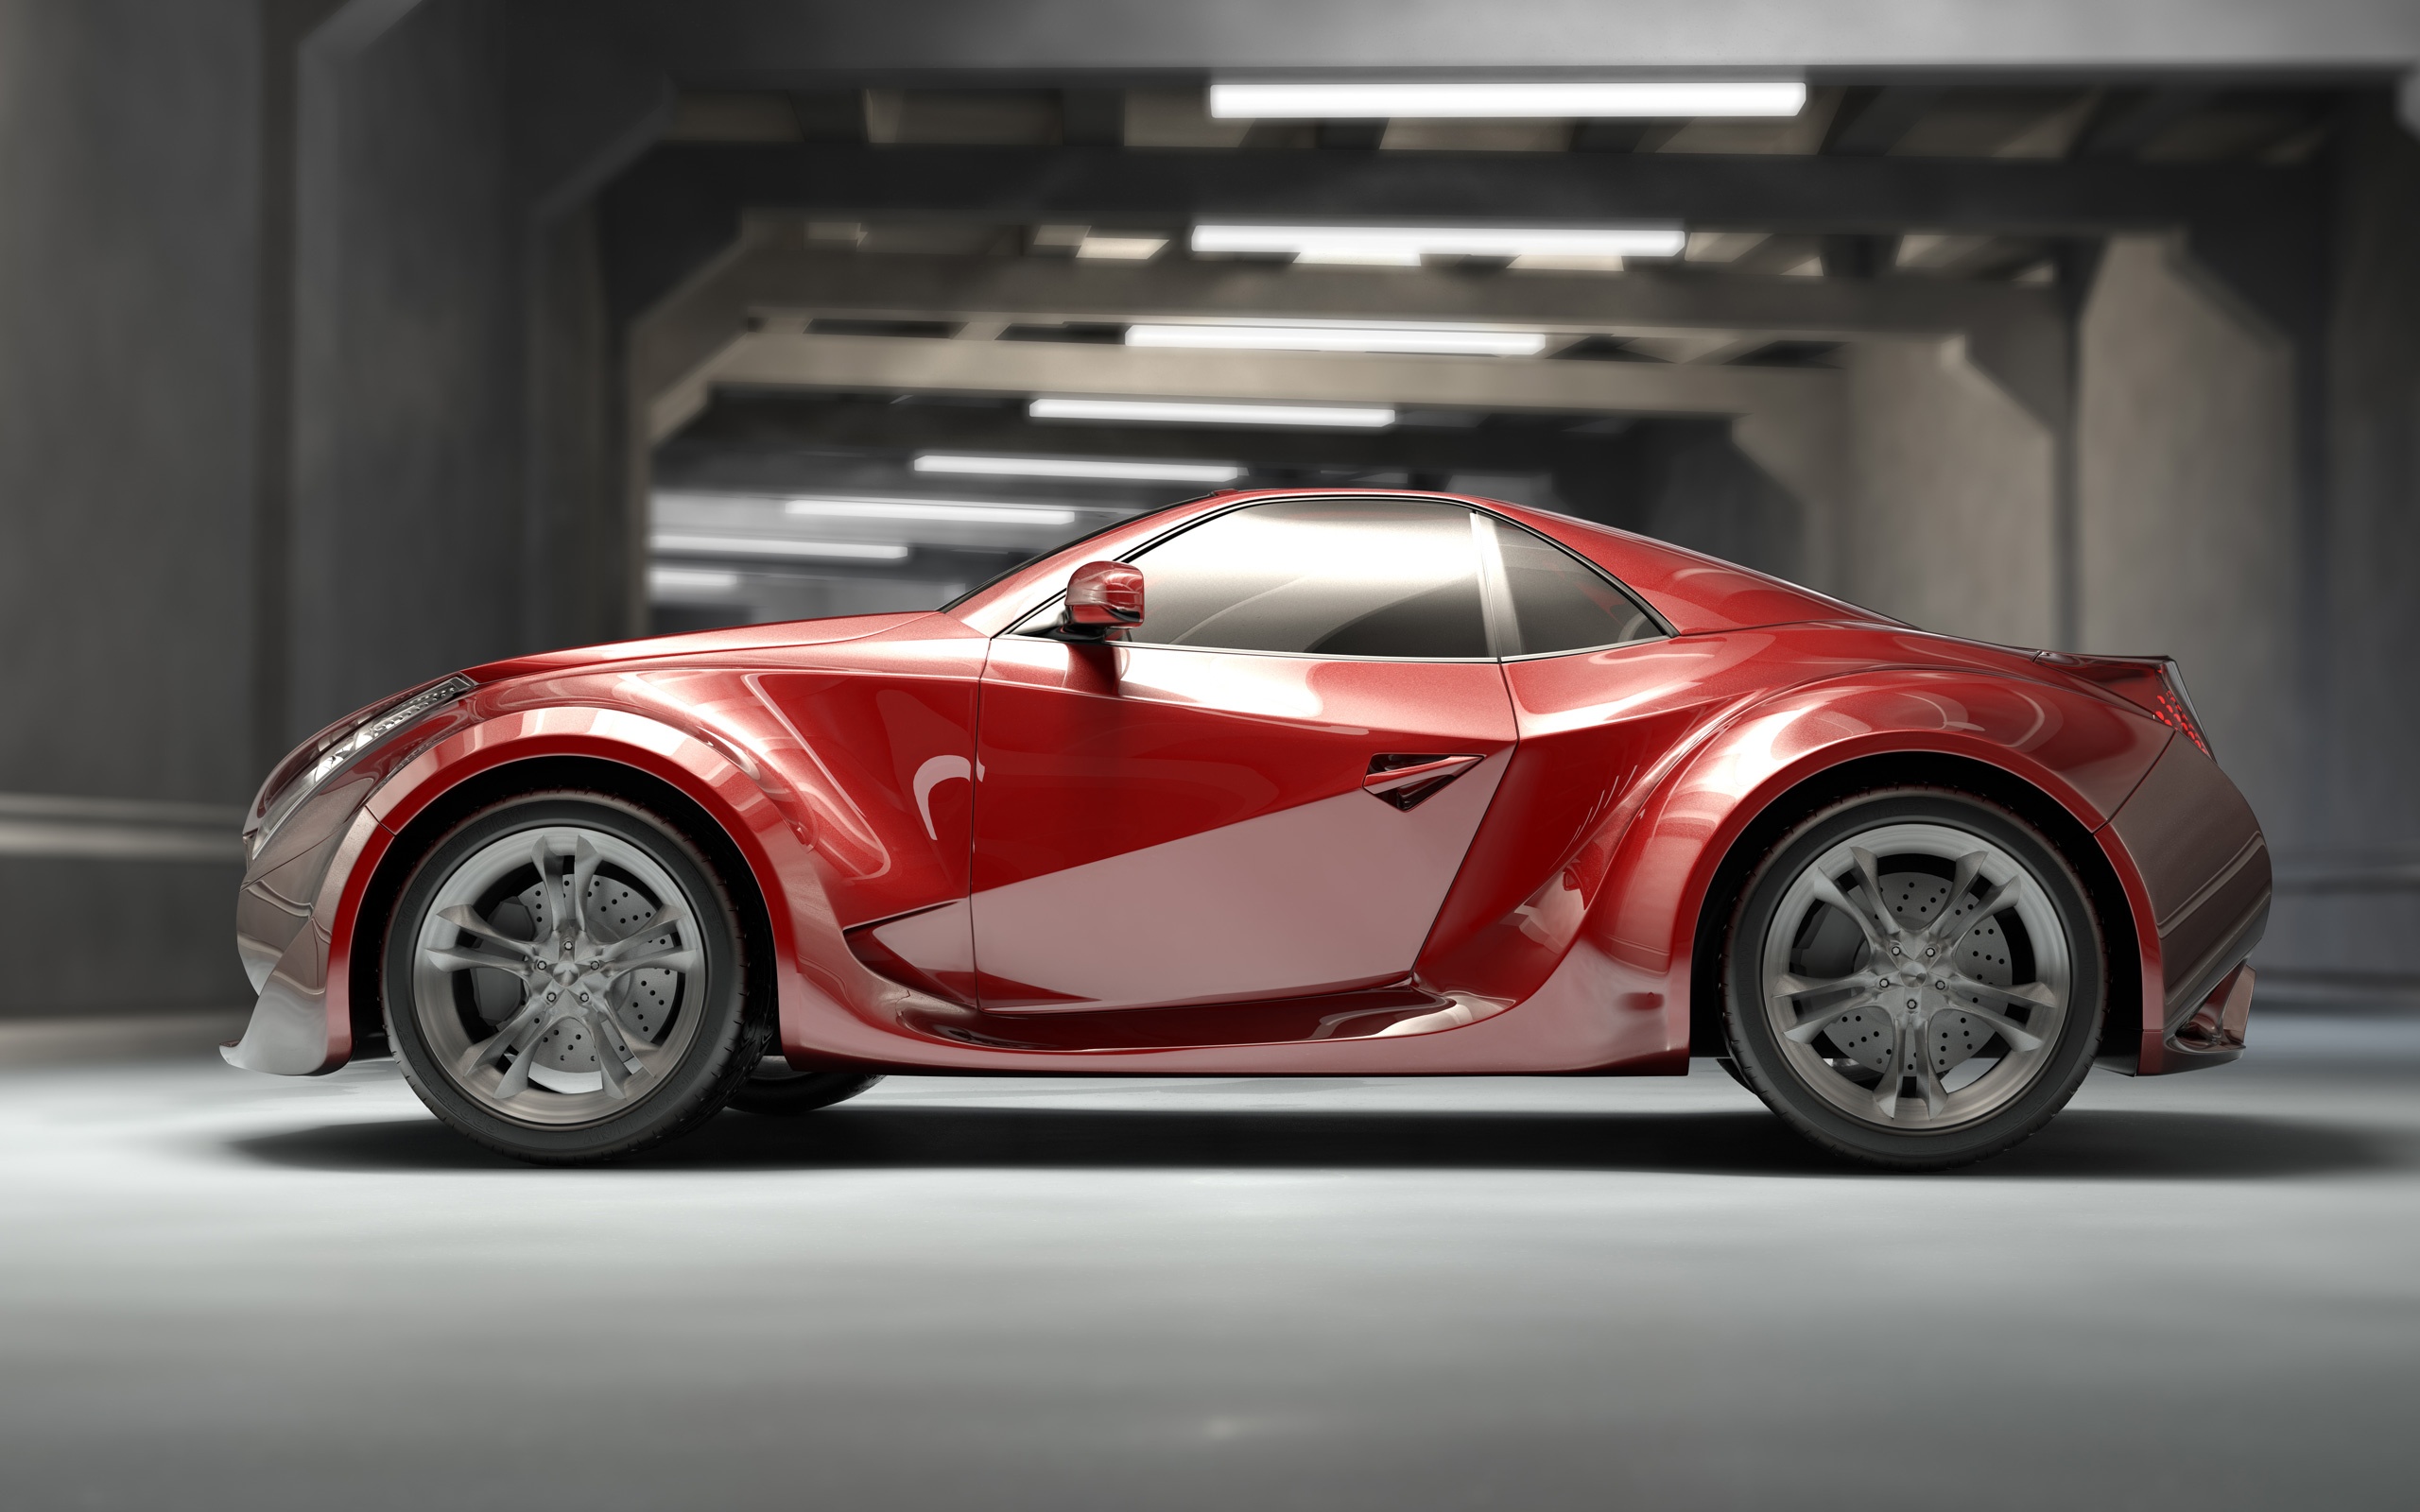 The Future Car Wallpapers in jpg format for free download